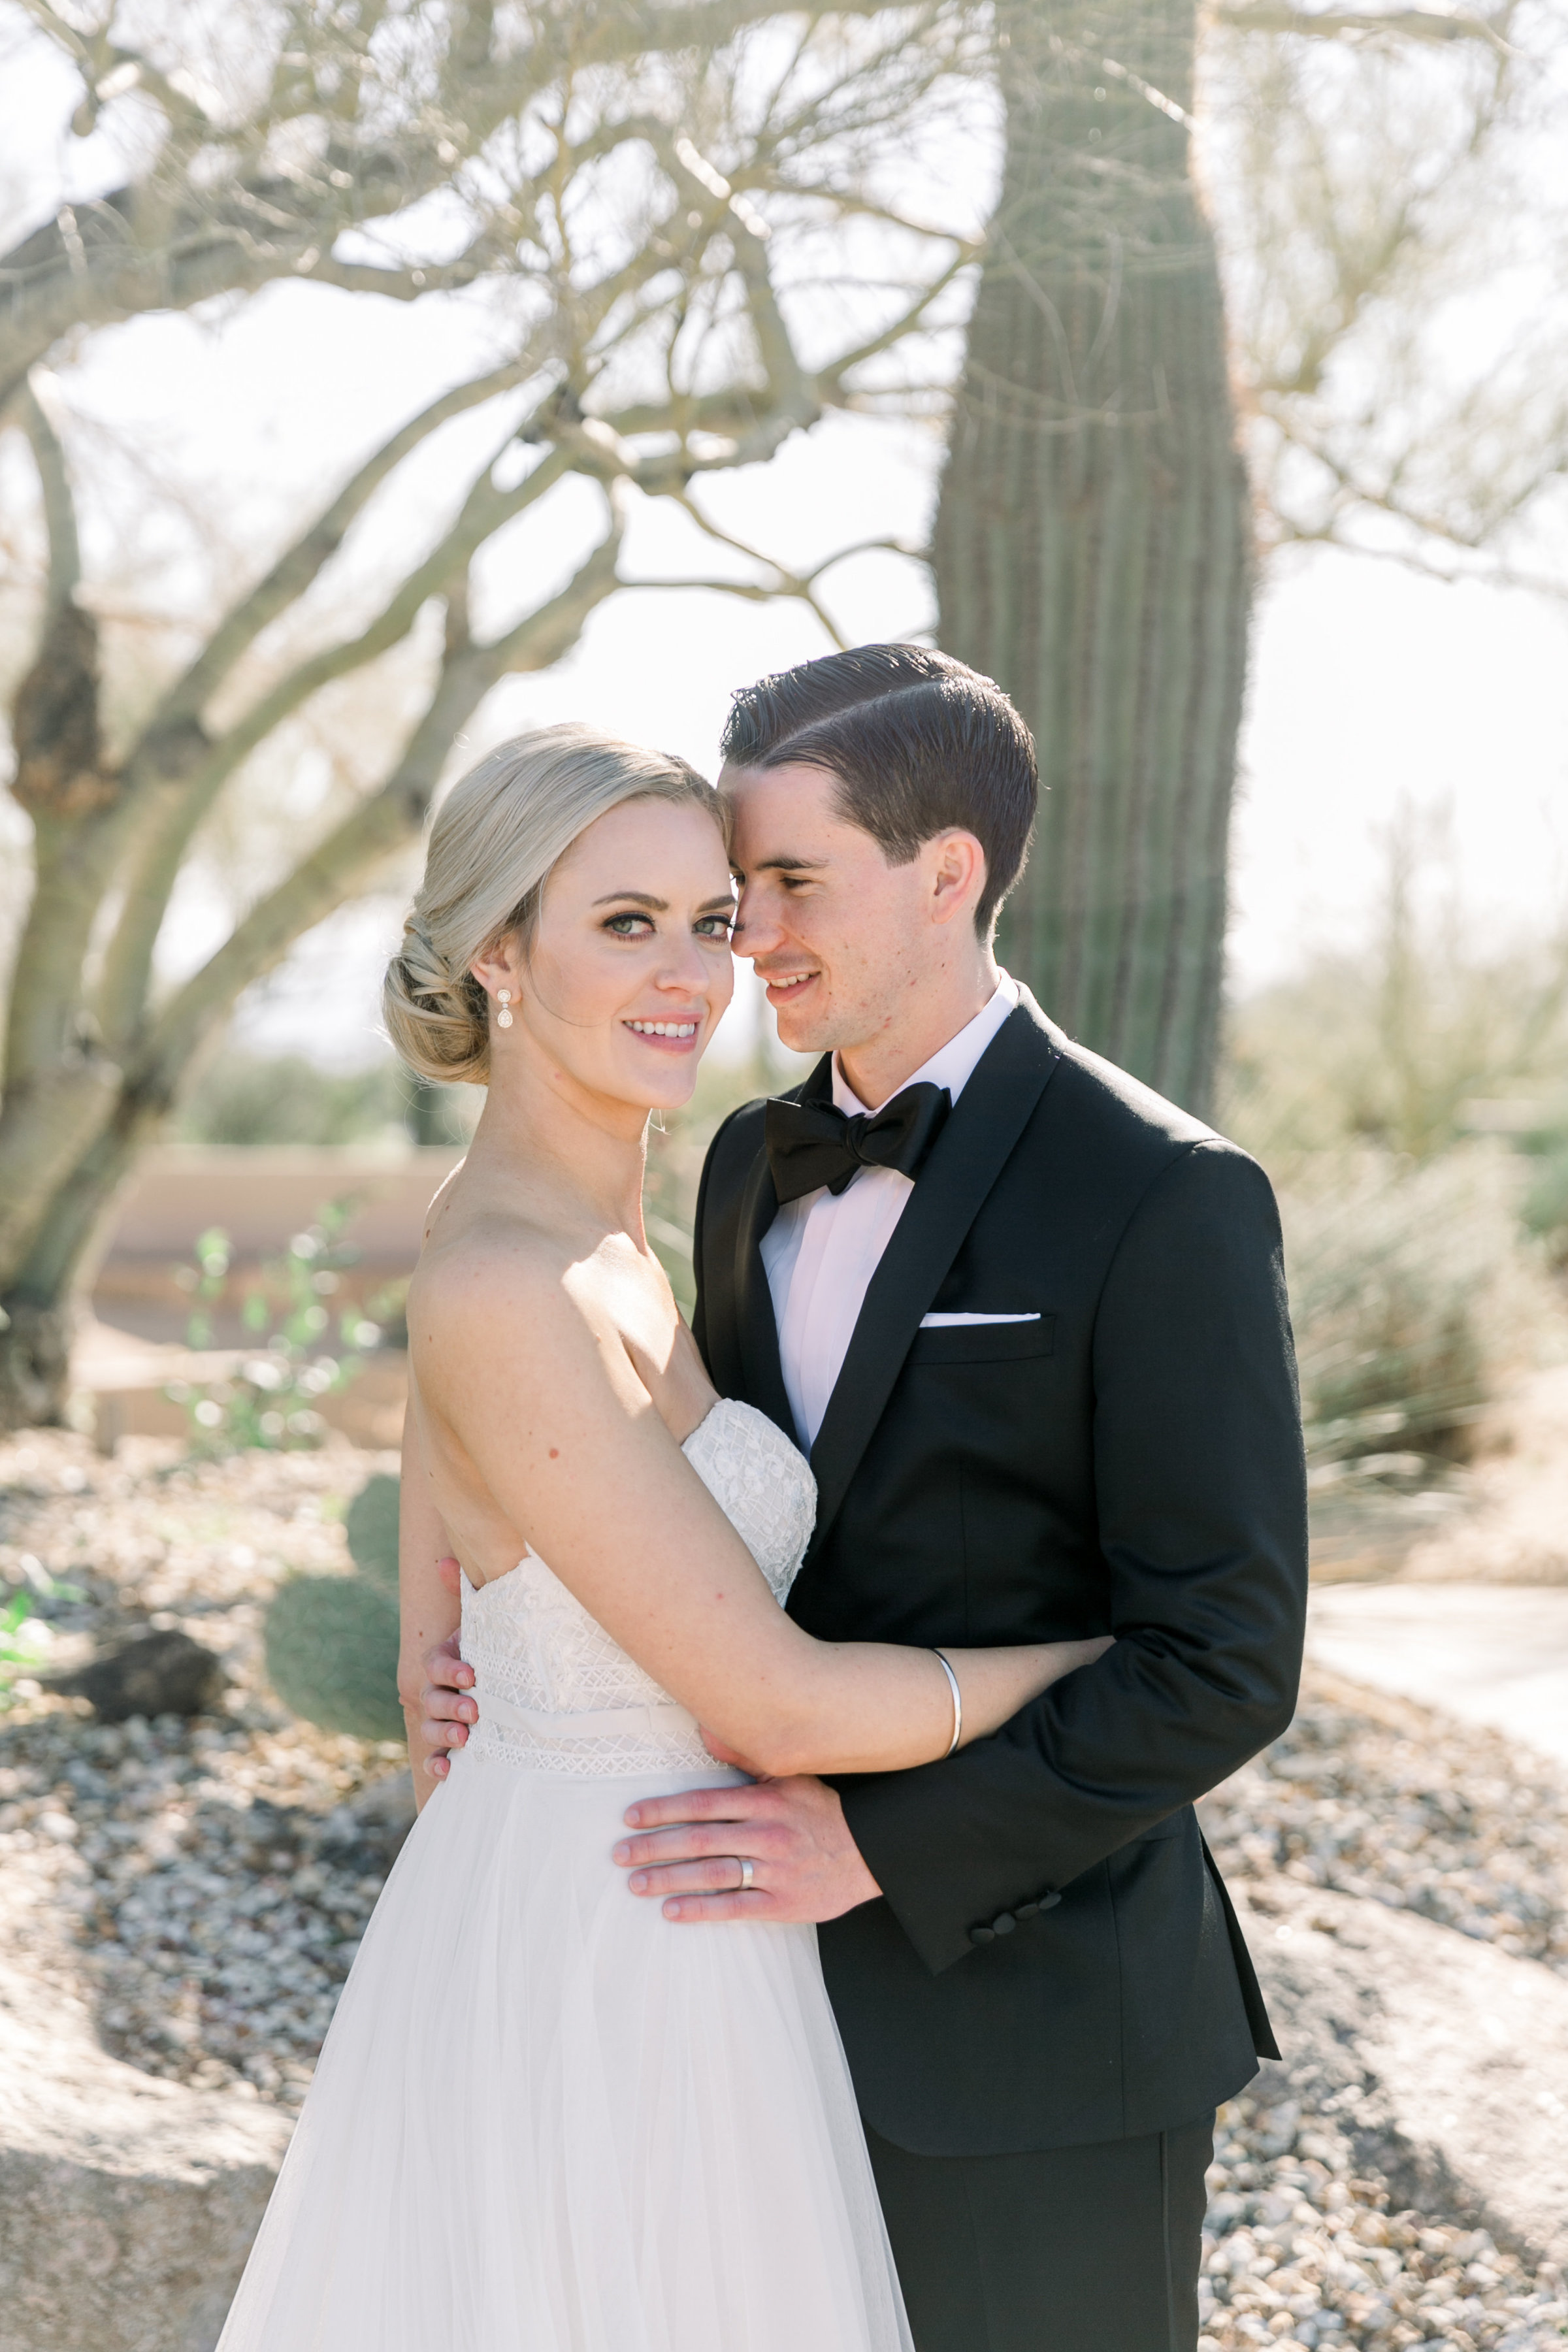 Karlie Colleen Photography - Arizona Wedding at The Troon Scottsdale Country Club - Paige & Shane -205